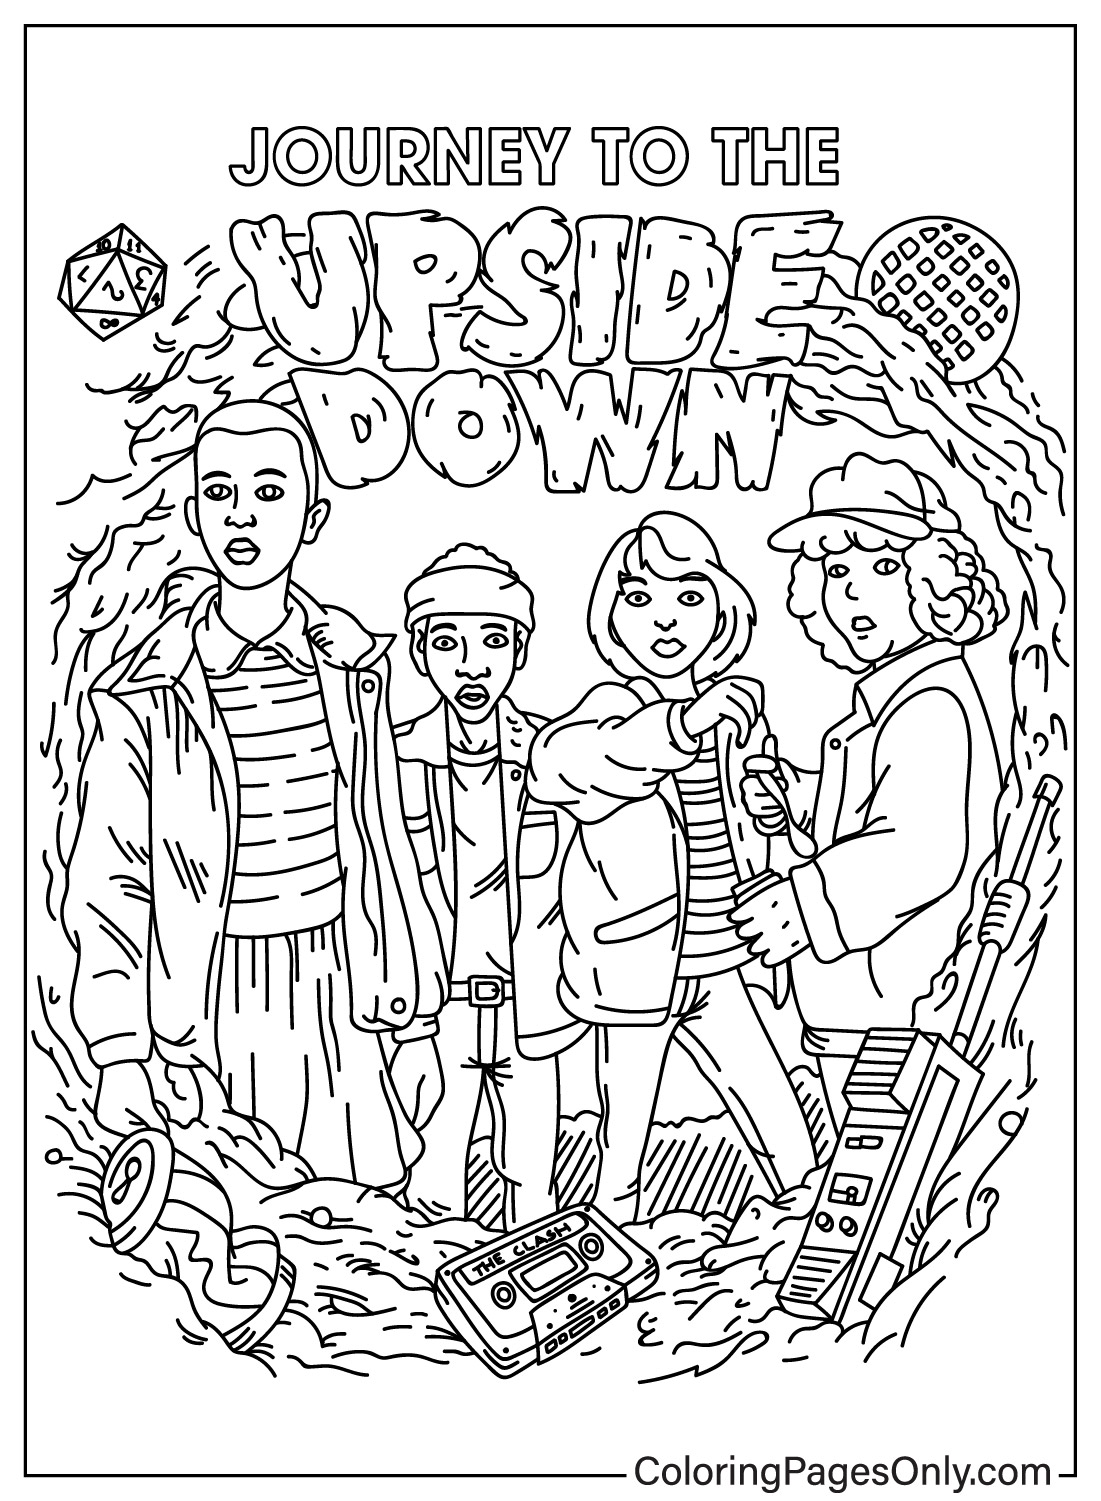 Coloring pages only on x ð wele to stranger things coloring pages ðâ httpstcojalrsbr strangerthings coloringpagesonly coloringpages coloringbook art fanart sketch drawing draw coloring usa trend trending trendingnow